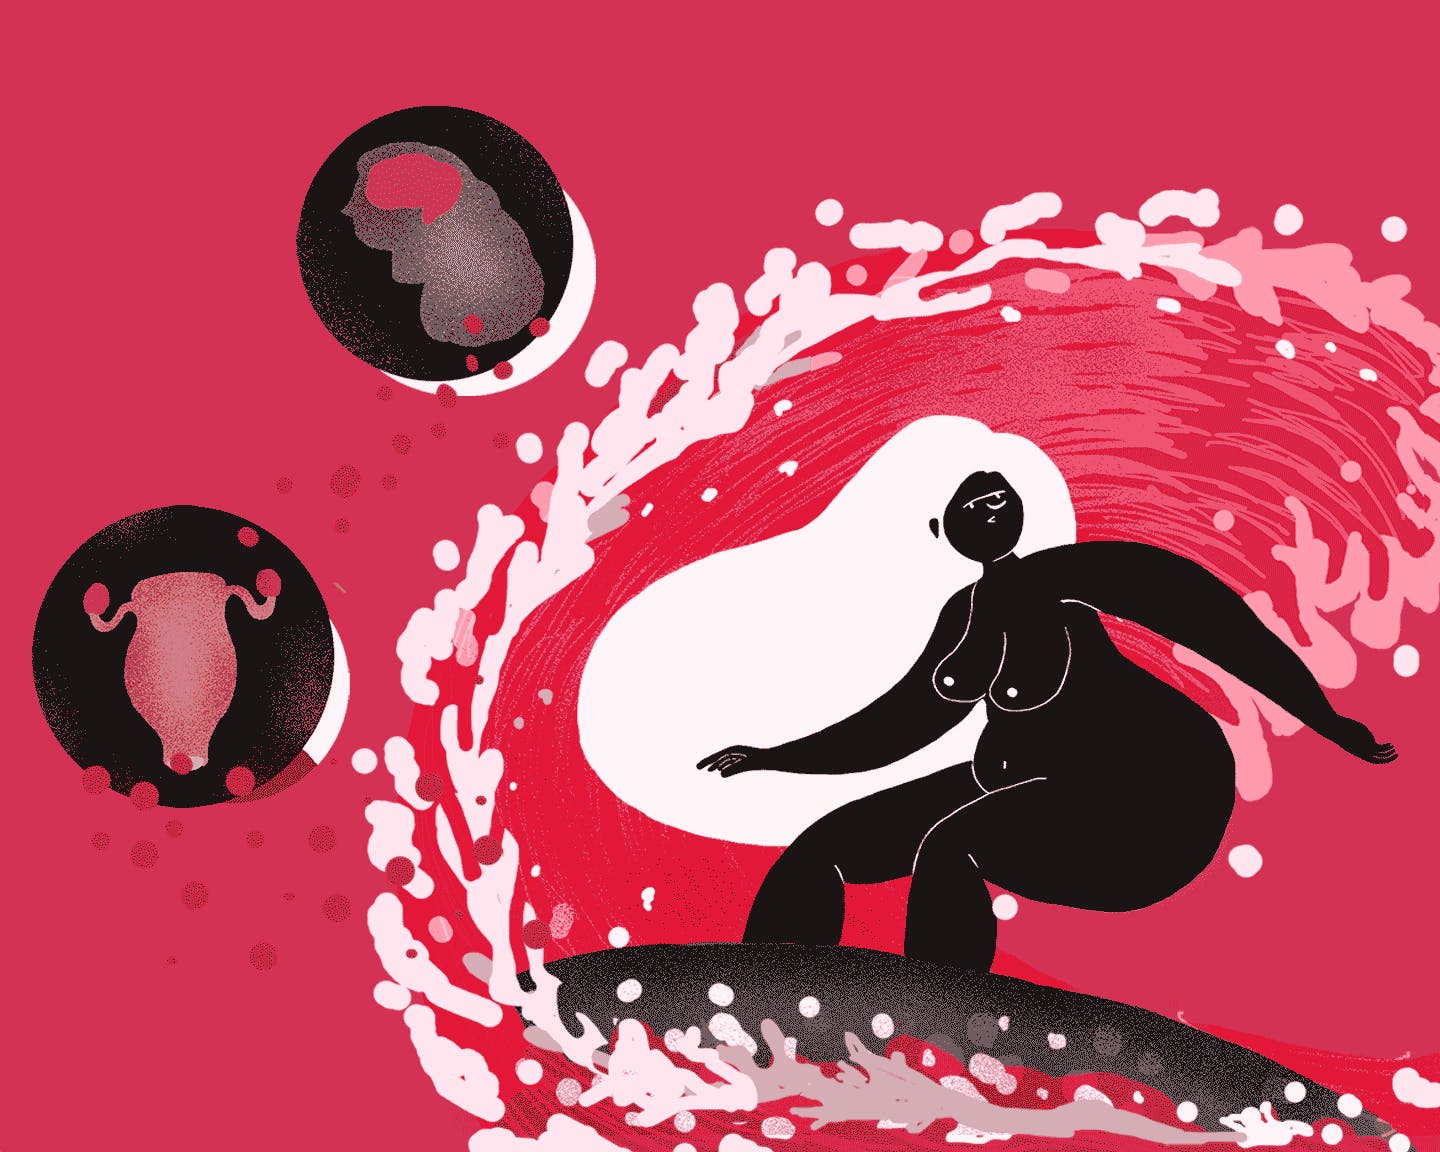 Illustration of a nude woman surfing against a red background